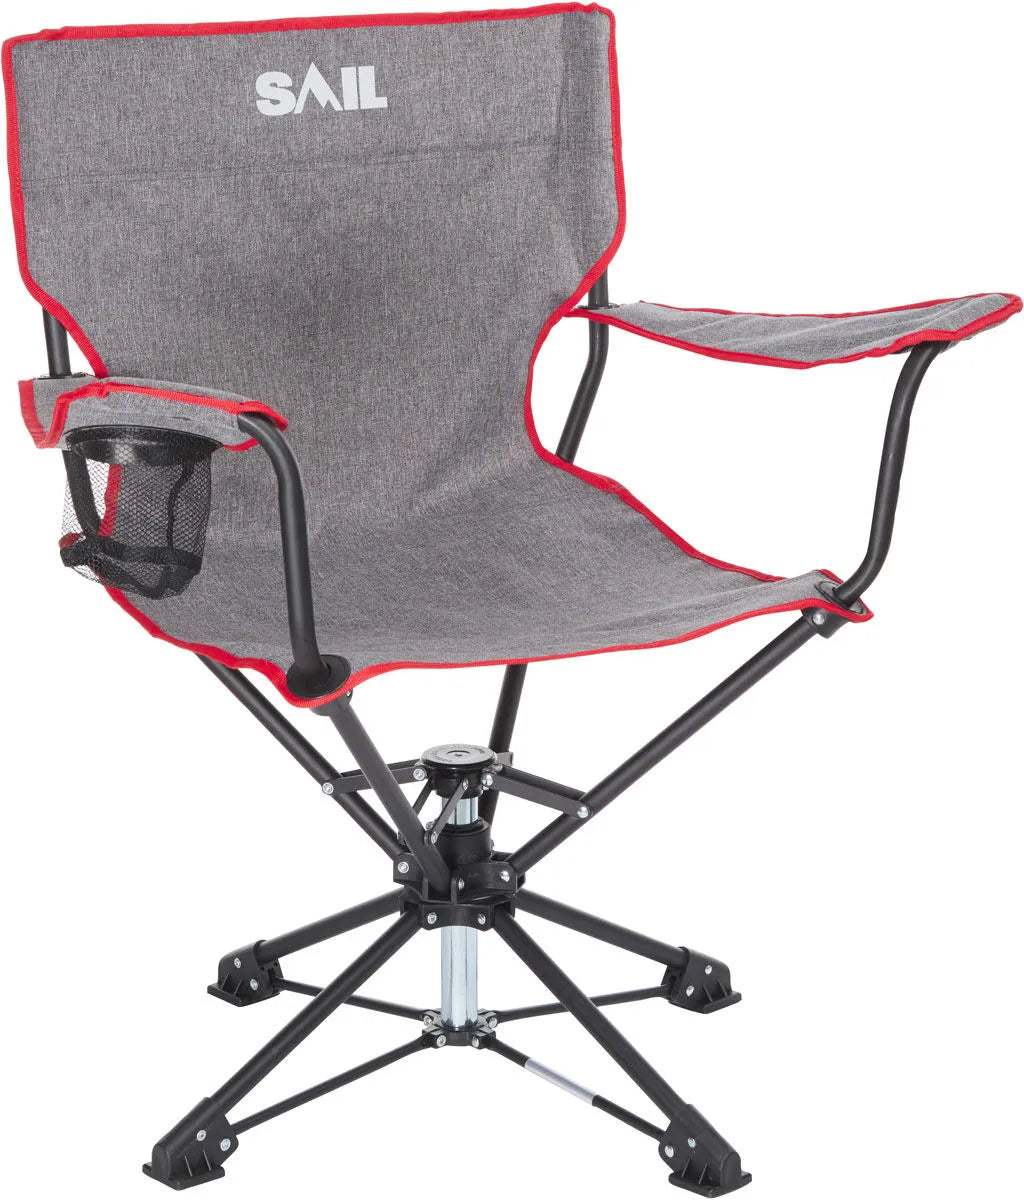 360-Degree Swivel Camping Chair